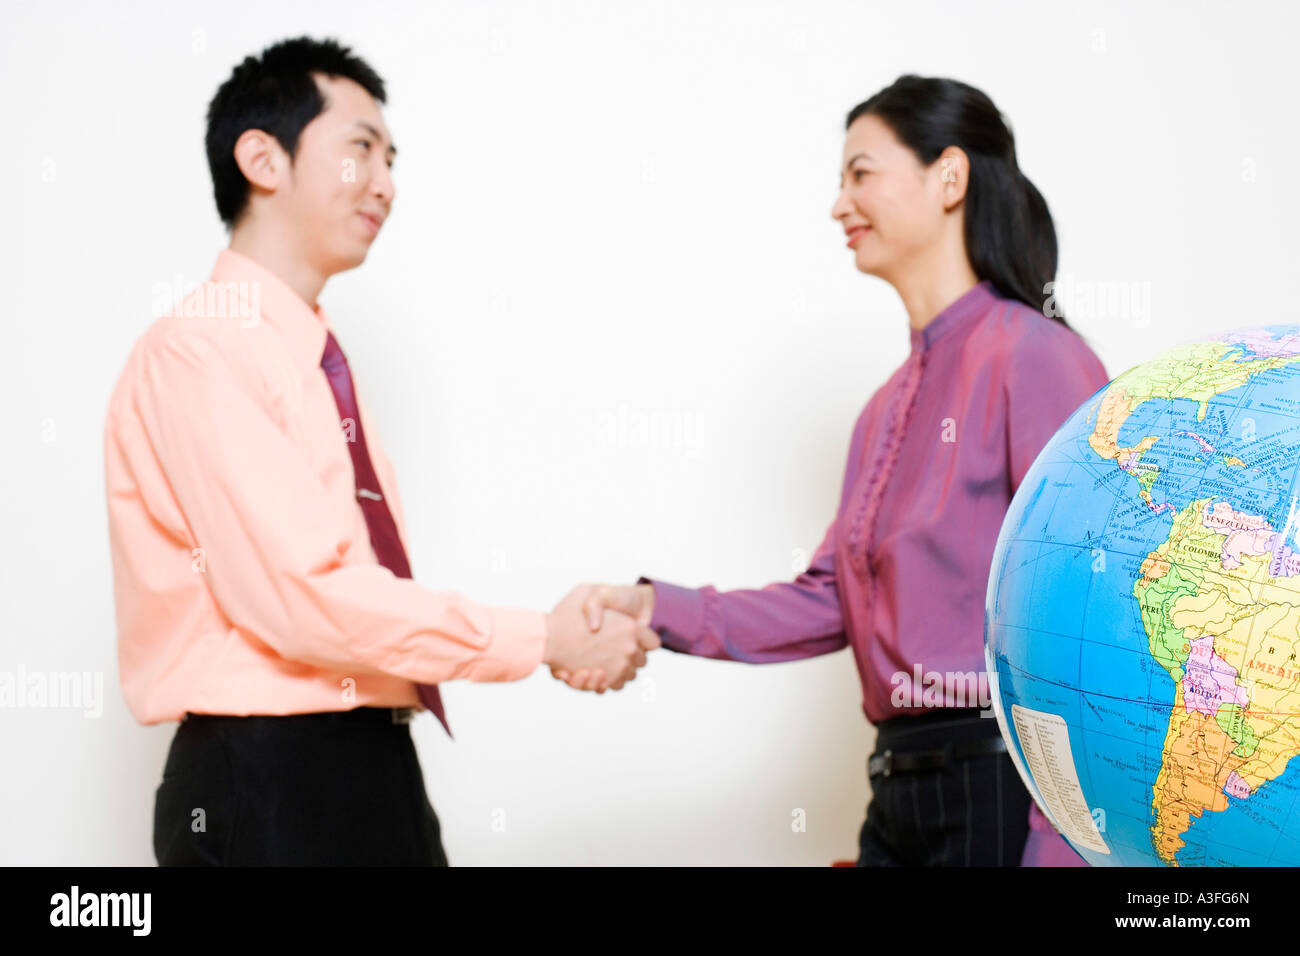 Businesswoman shaking hands with a businessman Banque D'Images